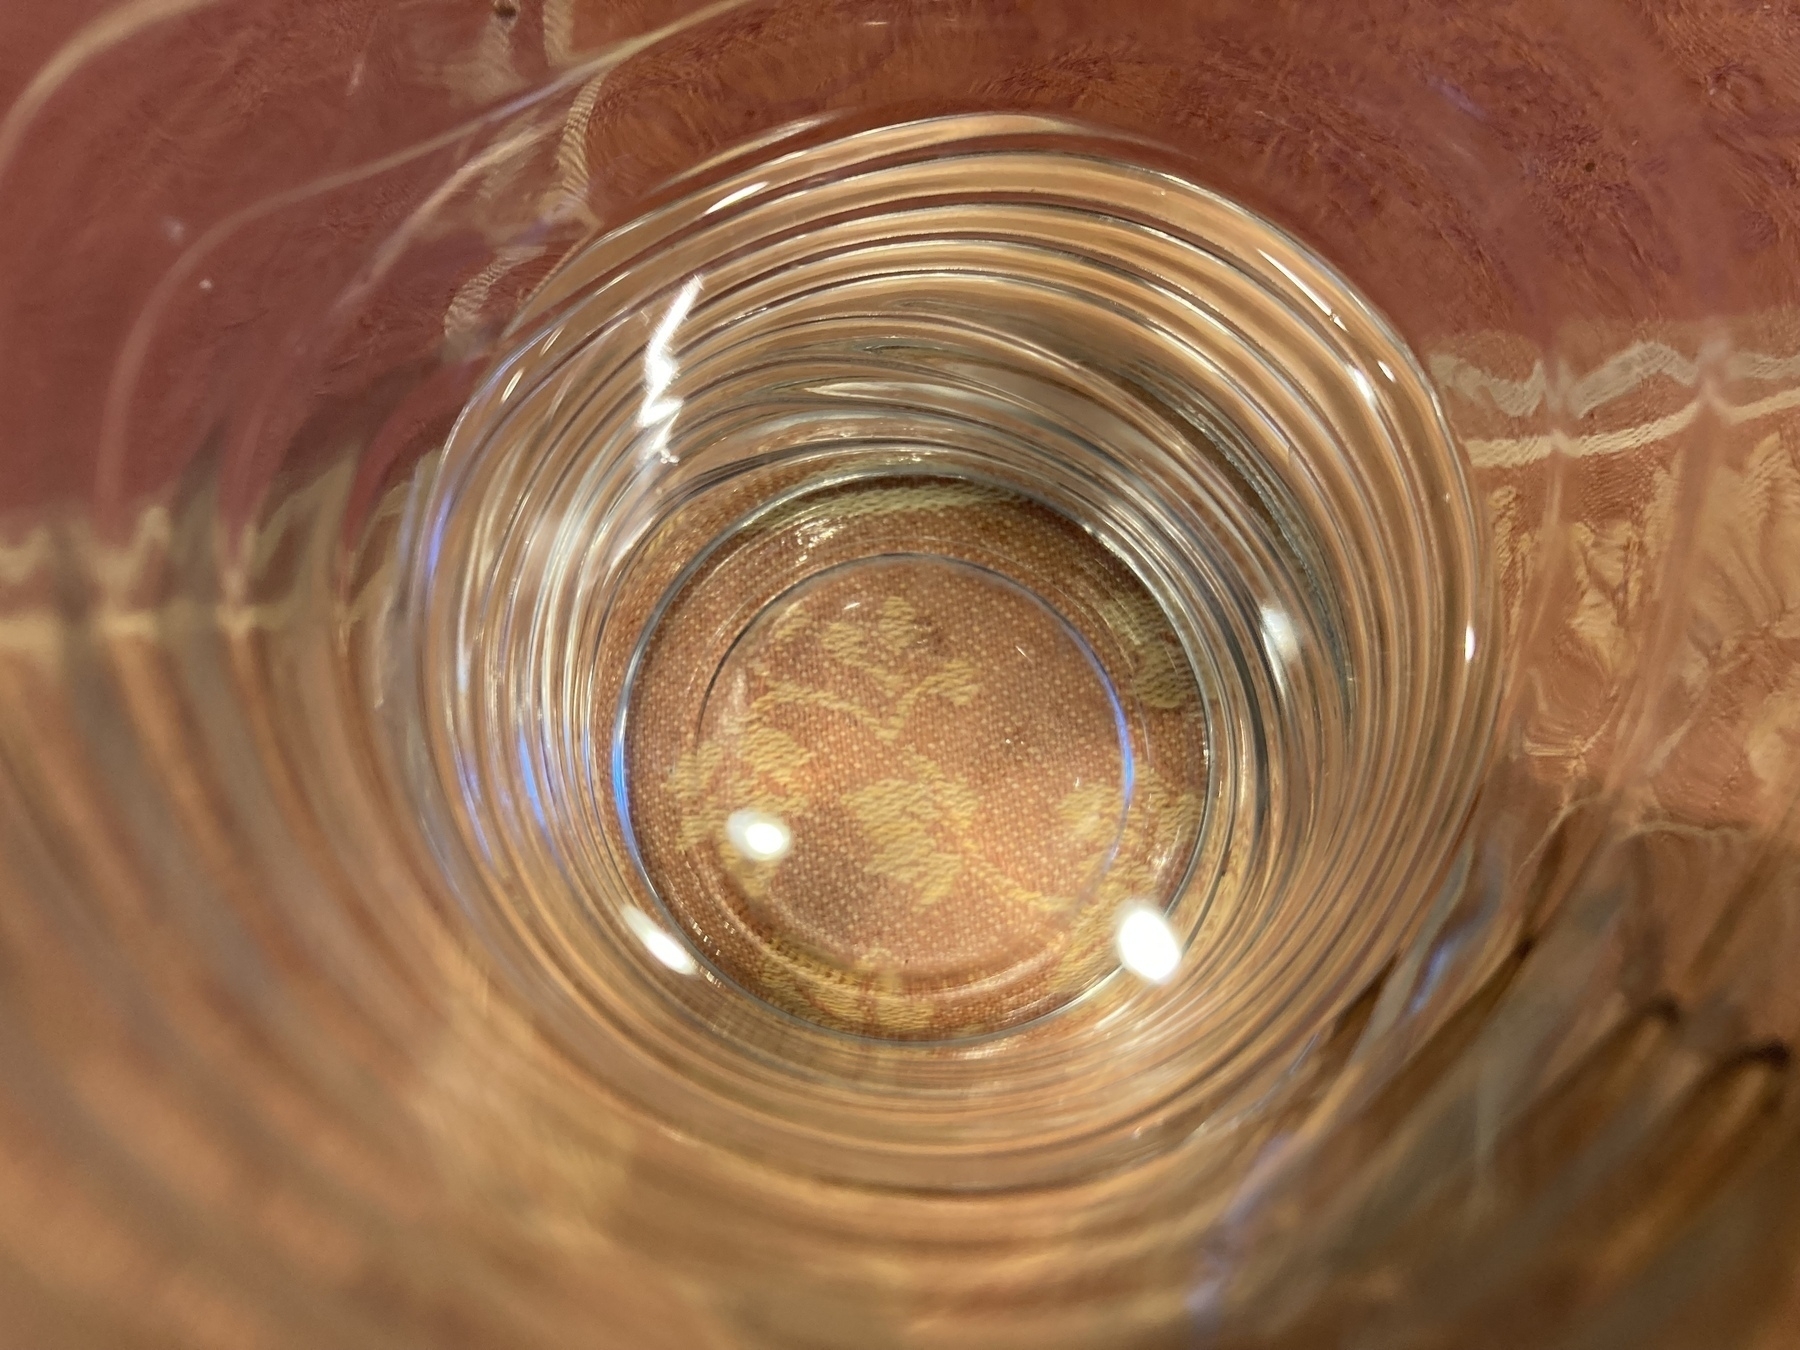 The camera lens looks straight down into a ribbed glass half full of water sitting on a tablecloth.